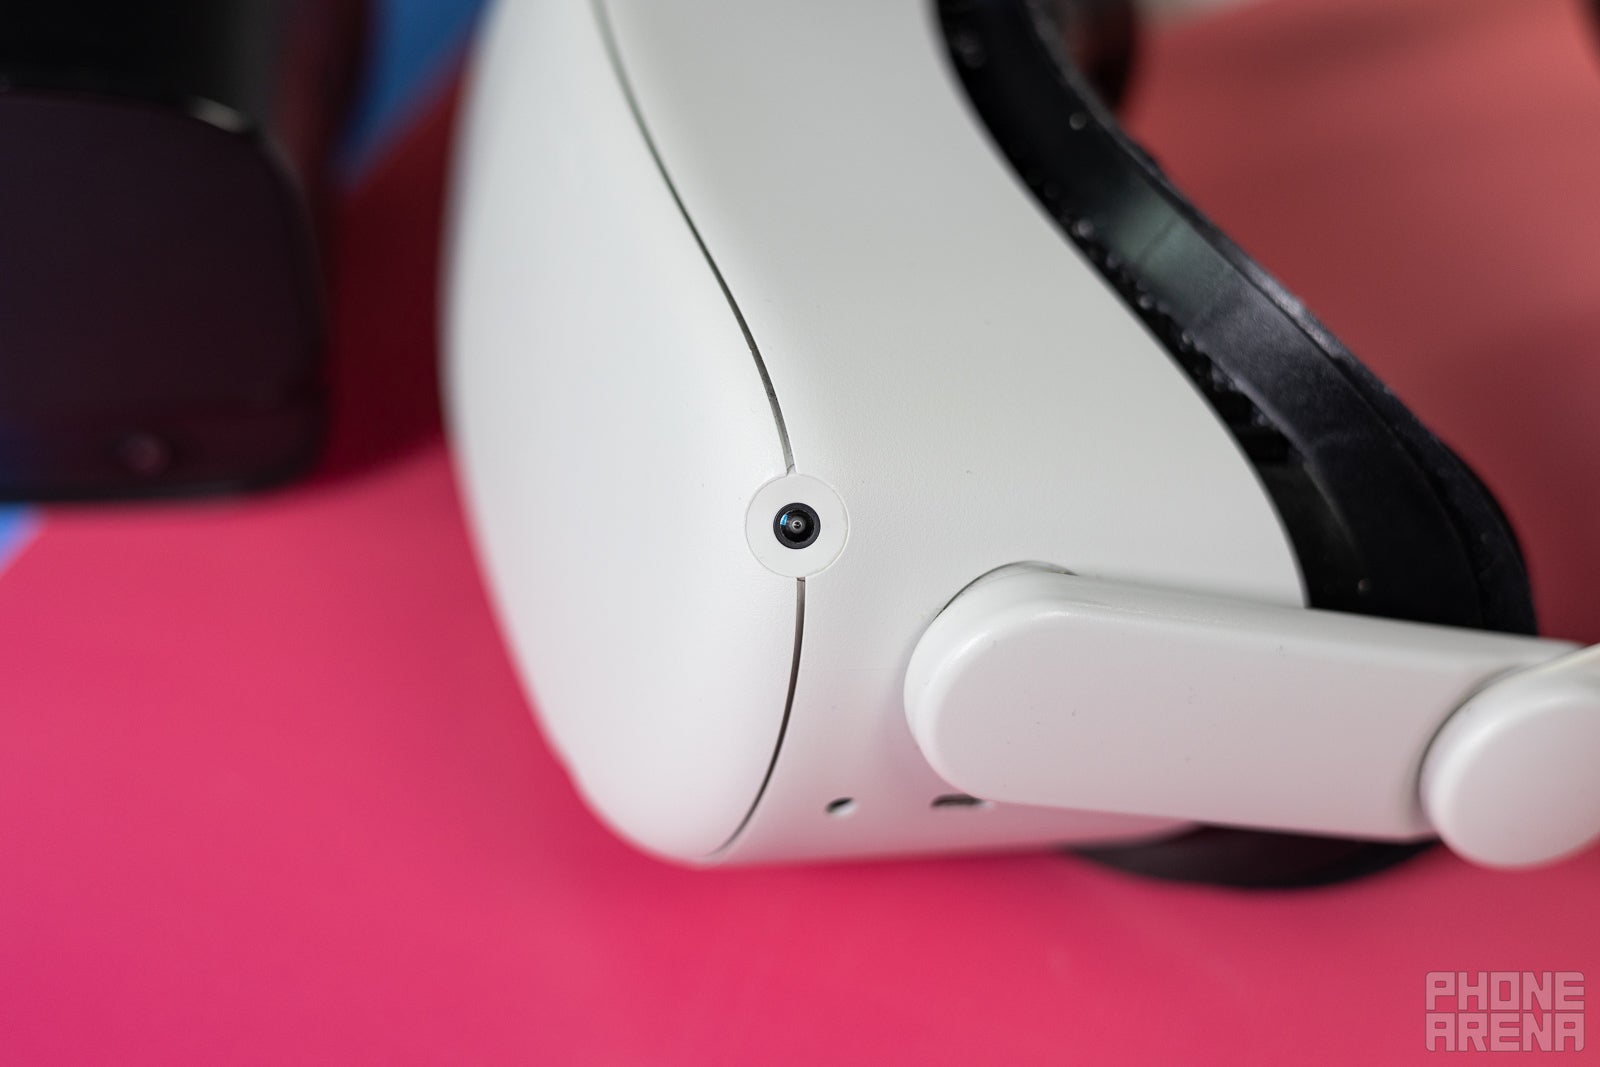 (Image Credit - PhoneArena) The Quest 2 has some really impressive speakers, embedded into the side plastic pieces that hold the head strap - Meta Quest 2 vs Oculus Rift S: Which one should you buy? The standalone VR headset or the PCVR-only